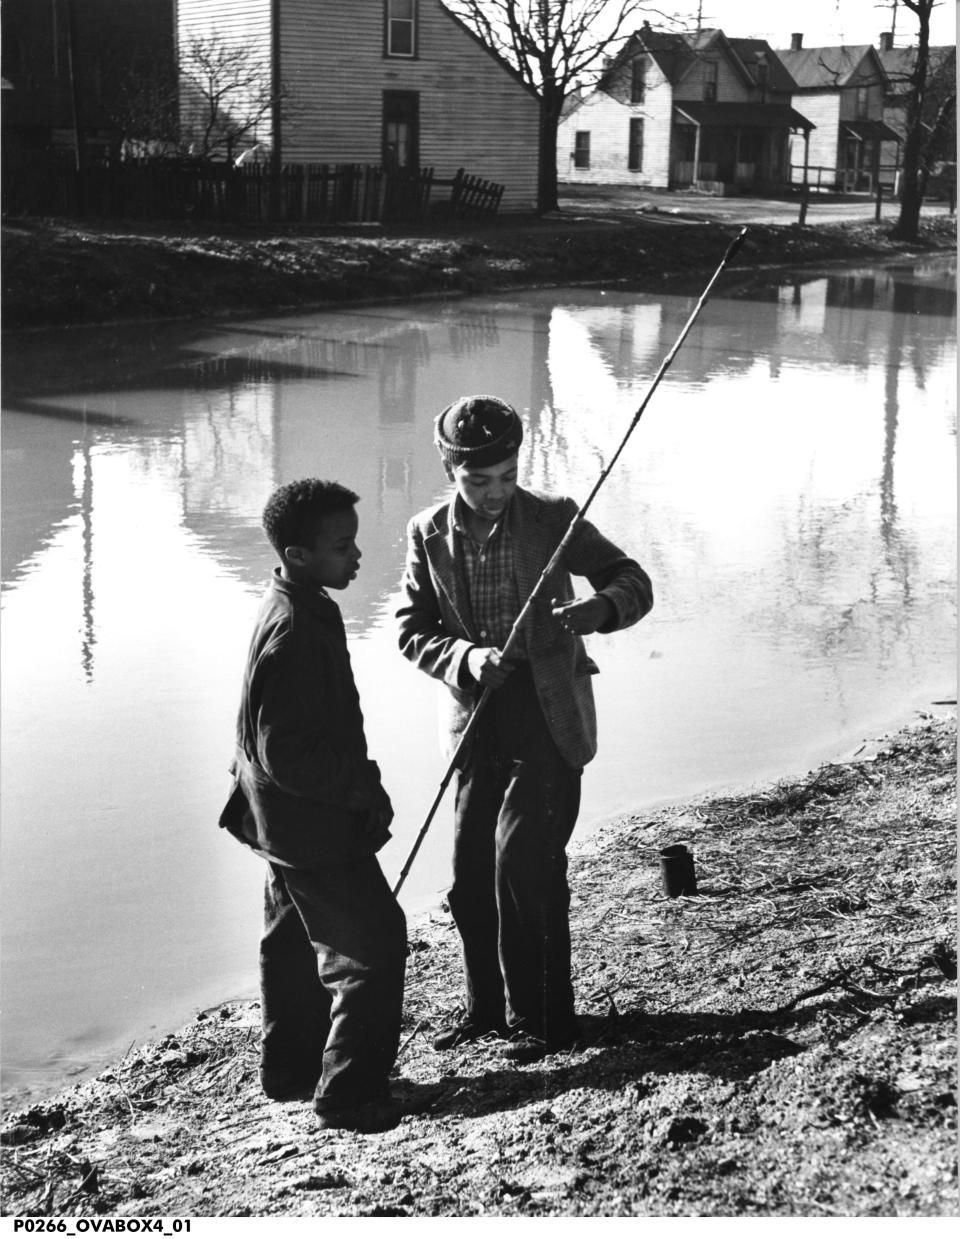 Photojournalist Oscar James Fox captured images of Indy's near west side, along the Canal and around Indiana Avenue, from 1945-1960. Here is a photograph titled "Two Boys Fishing on the Canal." Fox's photos preserve a period and place later erased by urban renewal and redevelopment plans.